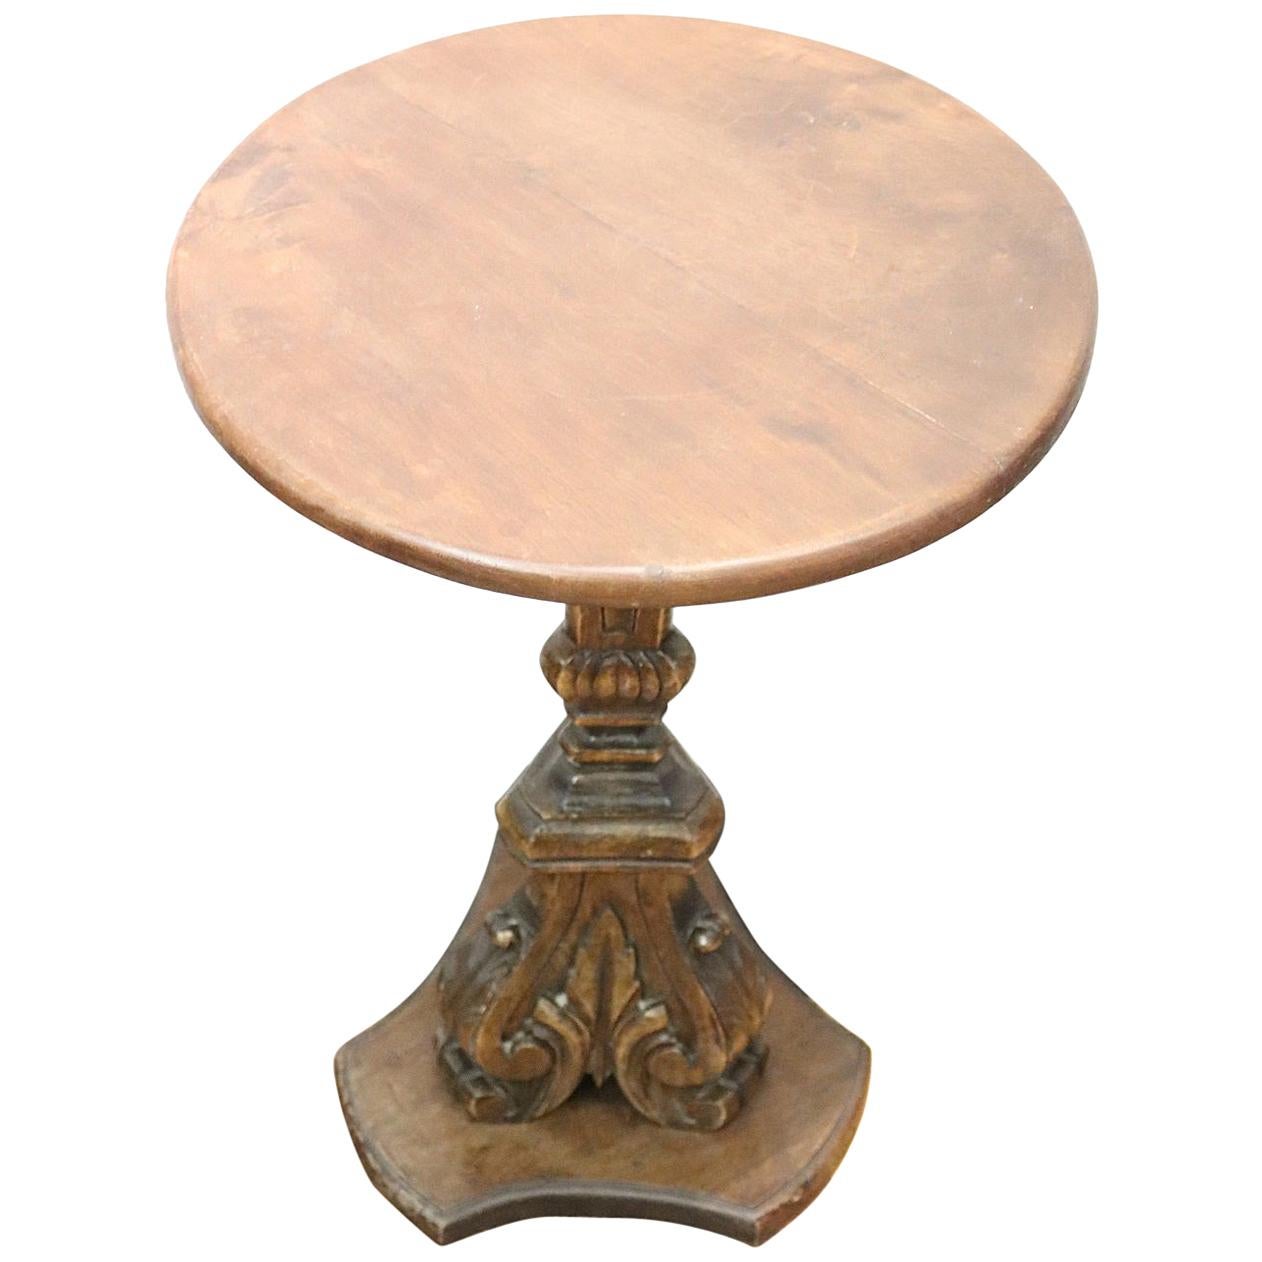 19th Century Italian Carved Walnut Round Side Table or Pedestal Table